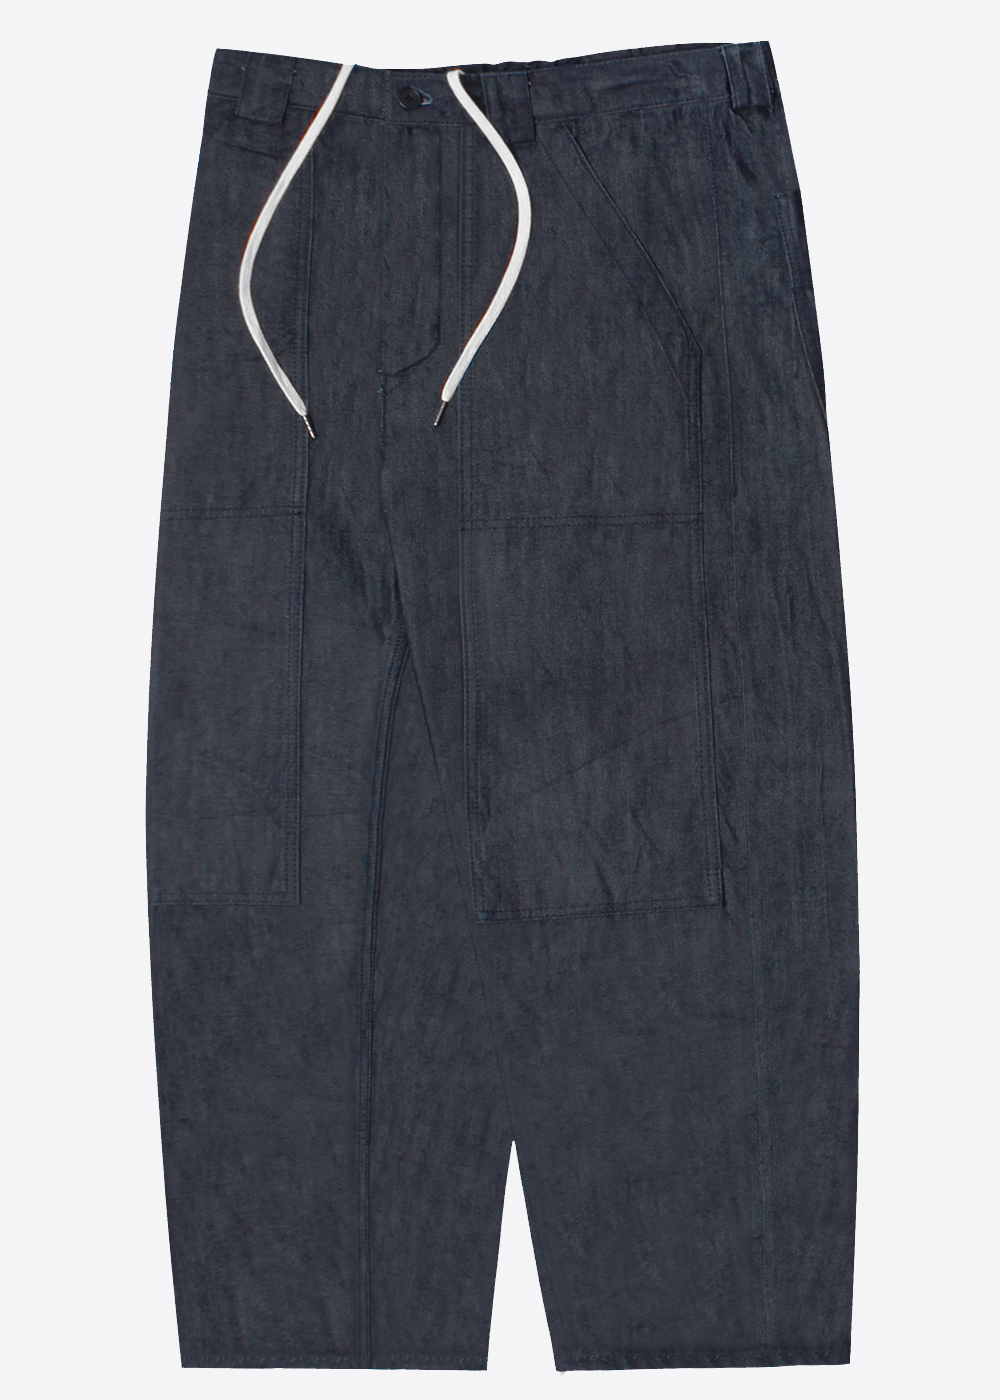 NIKO AND’wide fit’ denim double knee pant